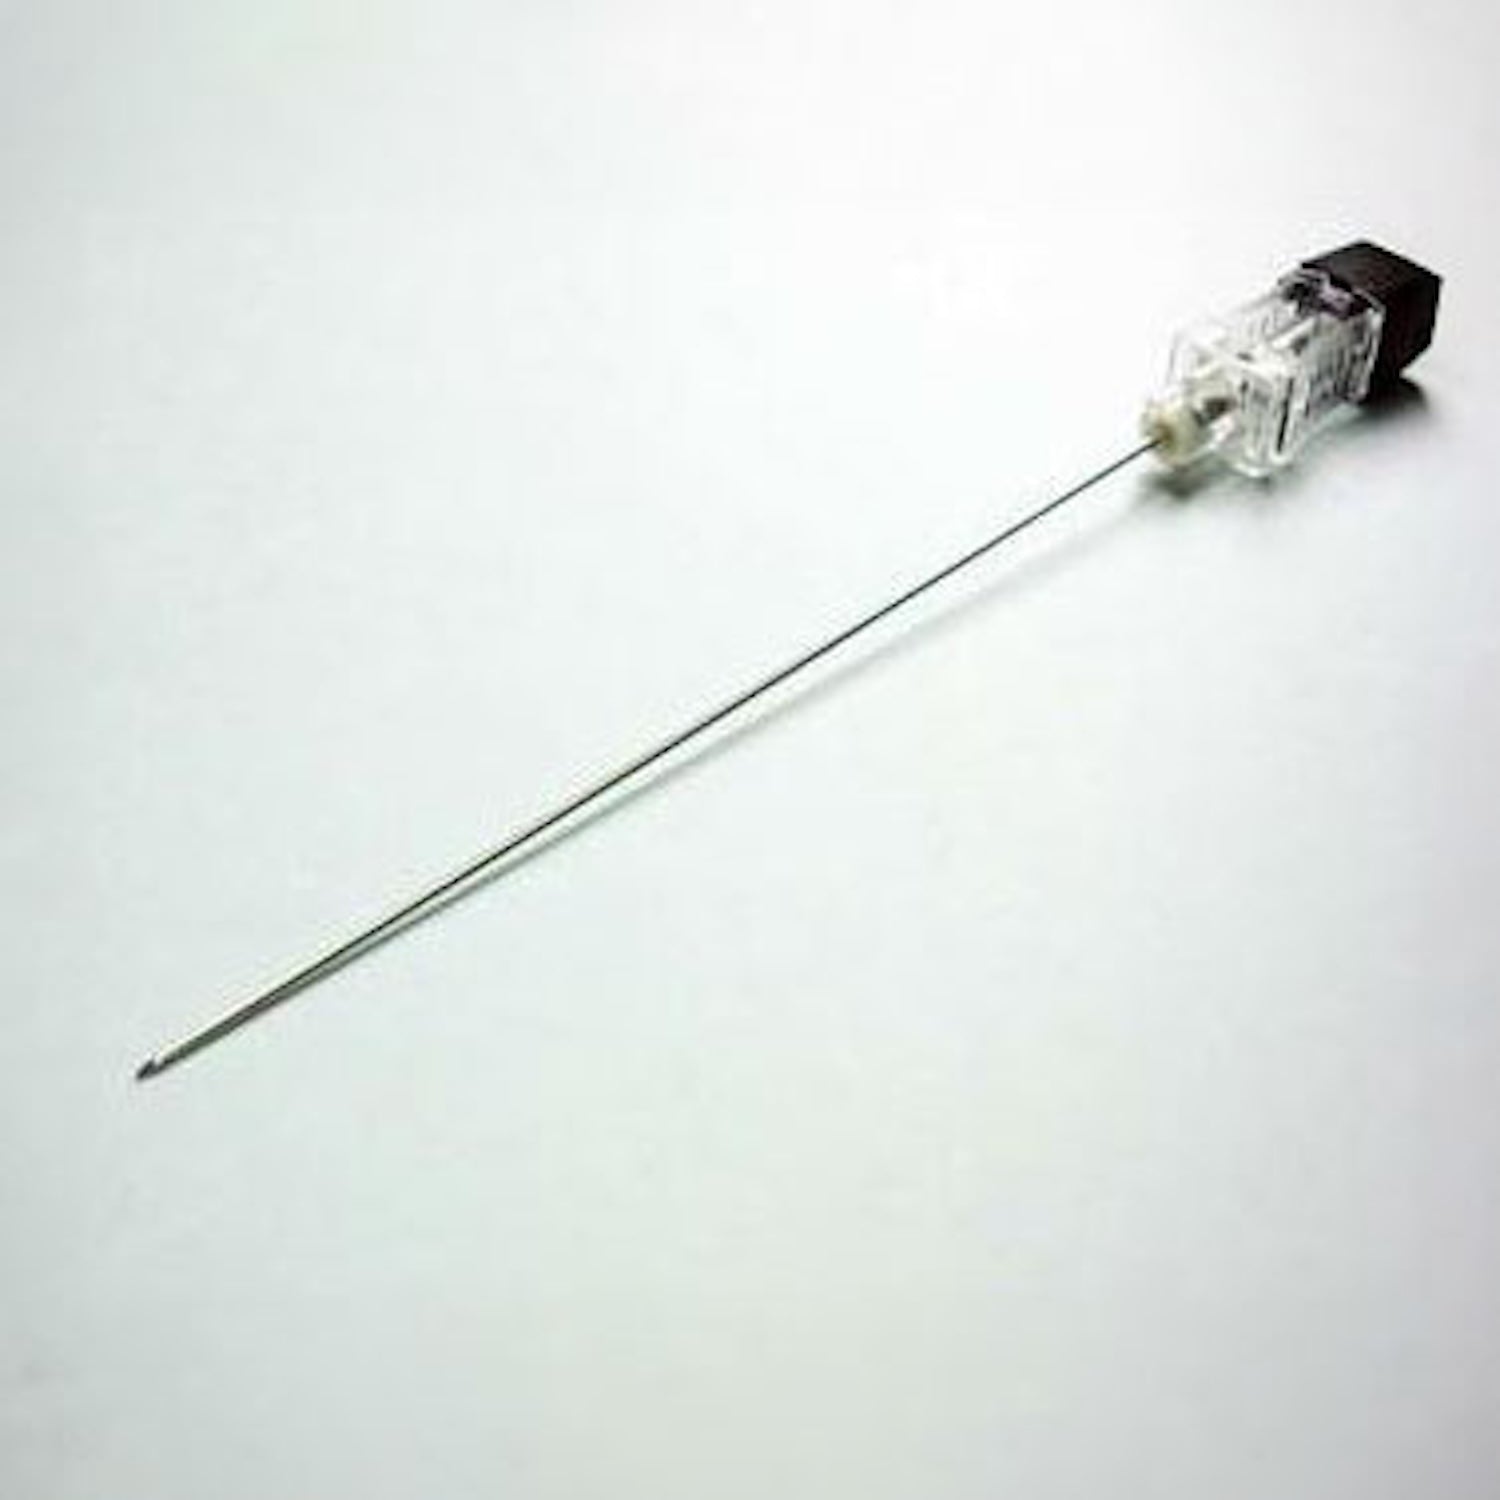 BD Long Length Spinal Needle with Quincke Bevel | Sterile | 22G | 127mm Long | Black | Case of 50